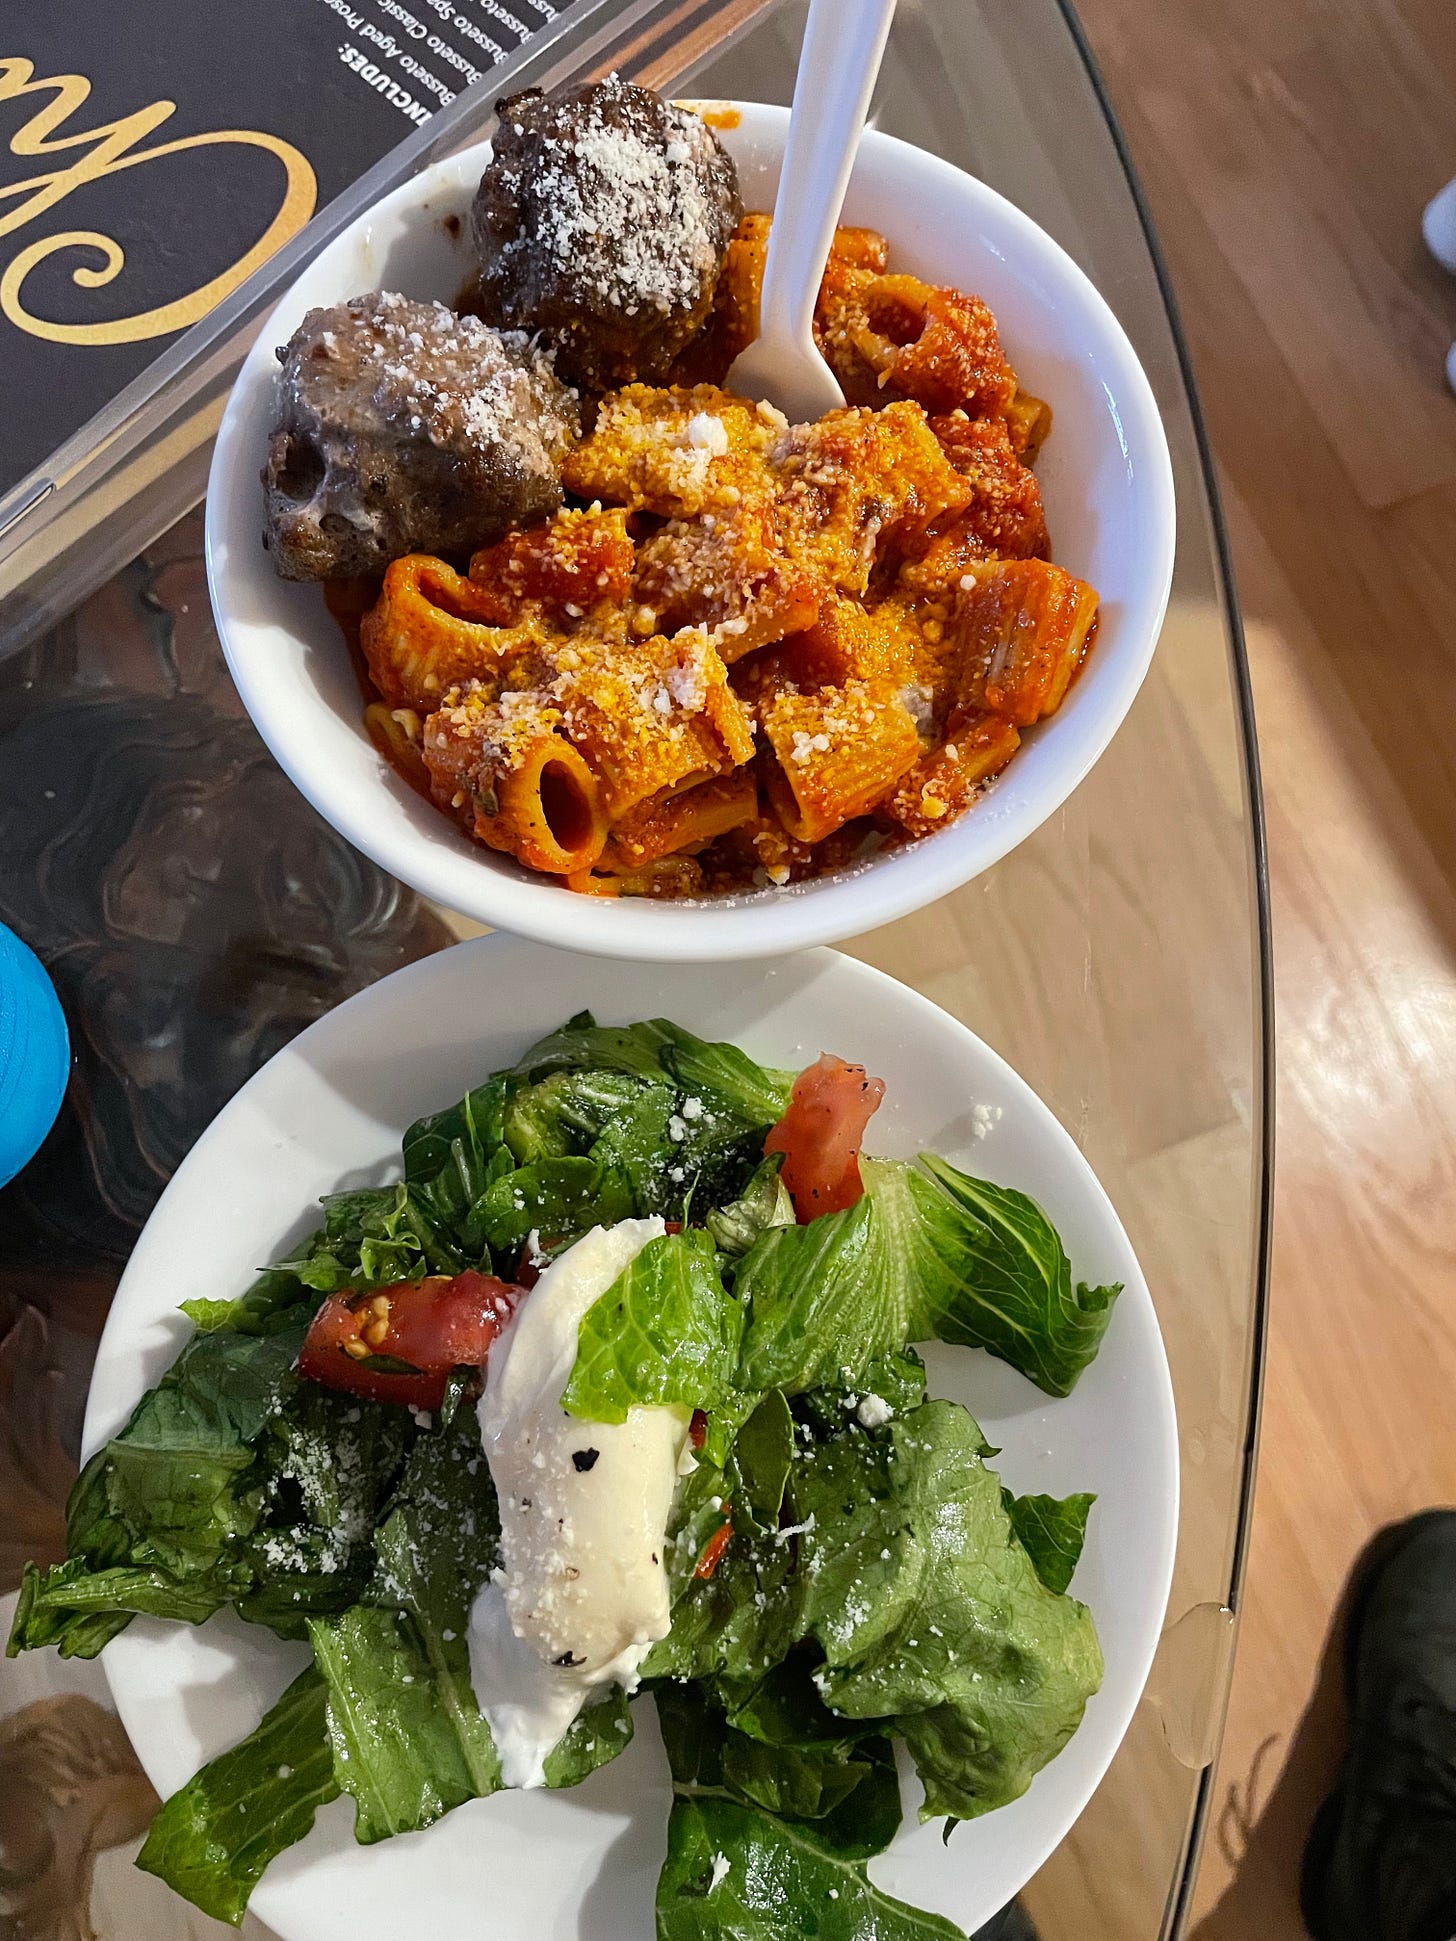 bowl of pasta and meatballs next to green salad with tomato and burrata